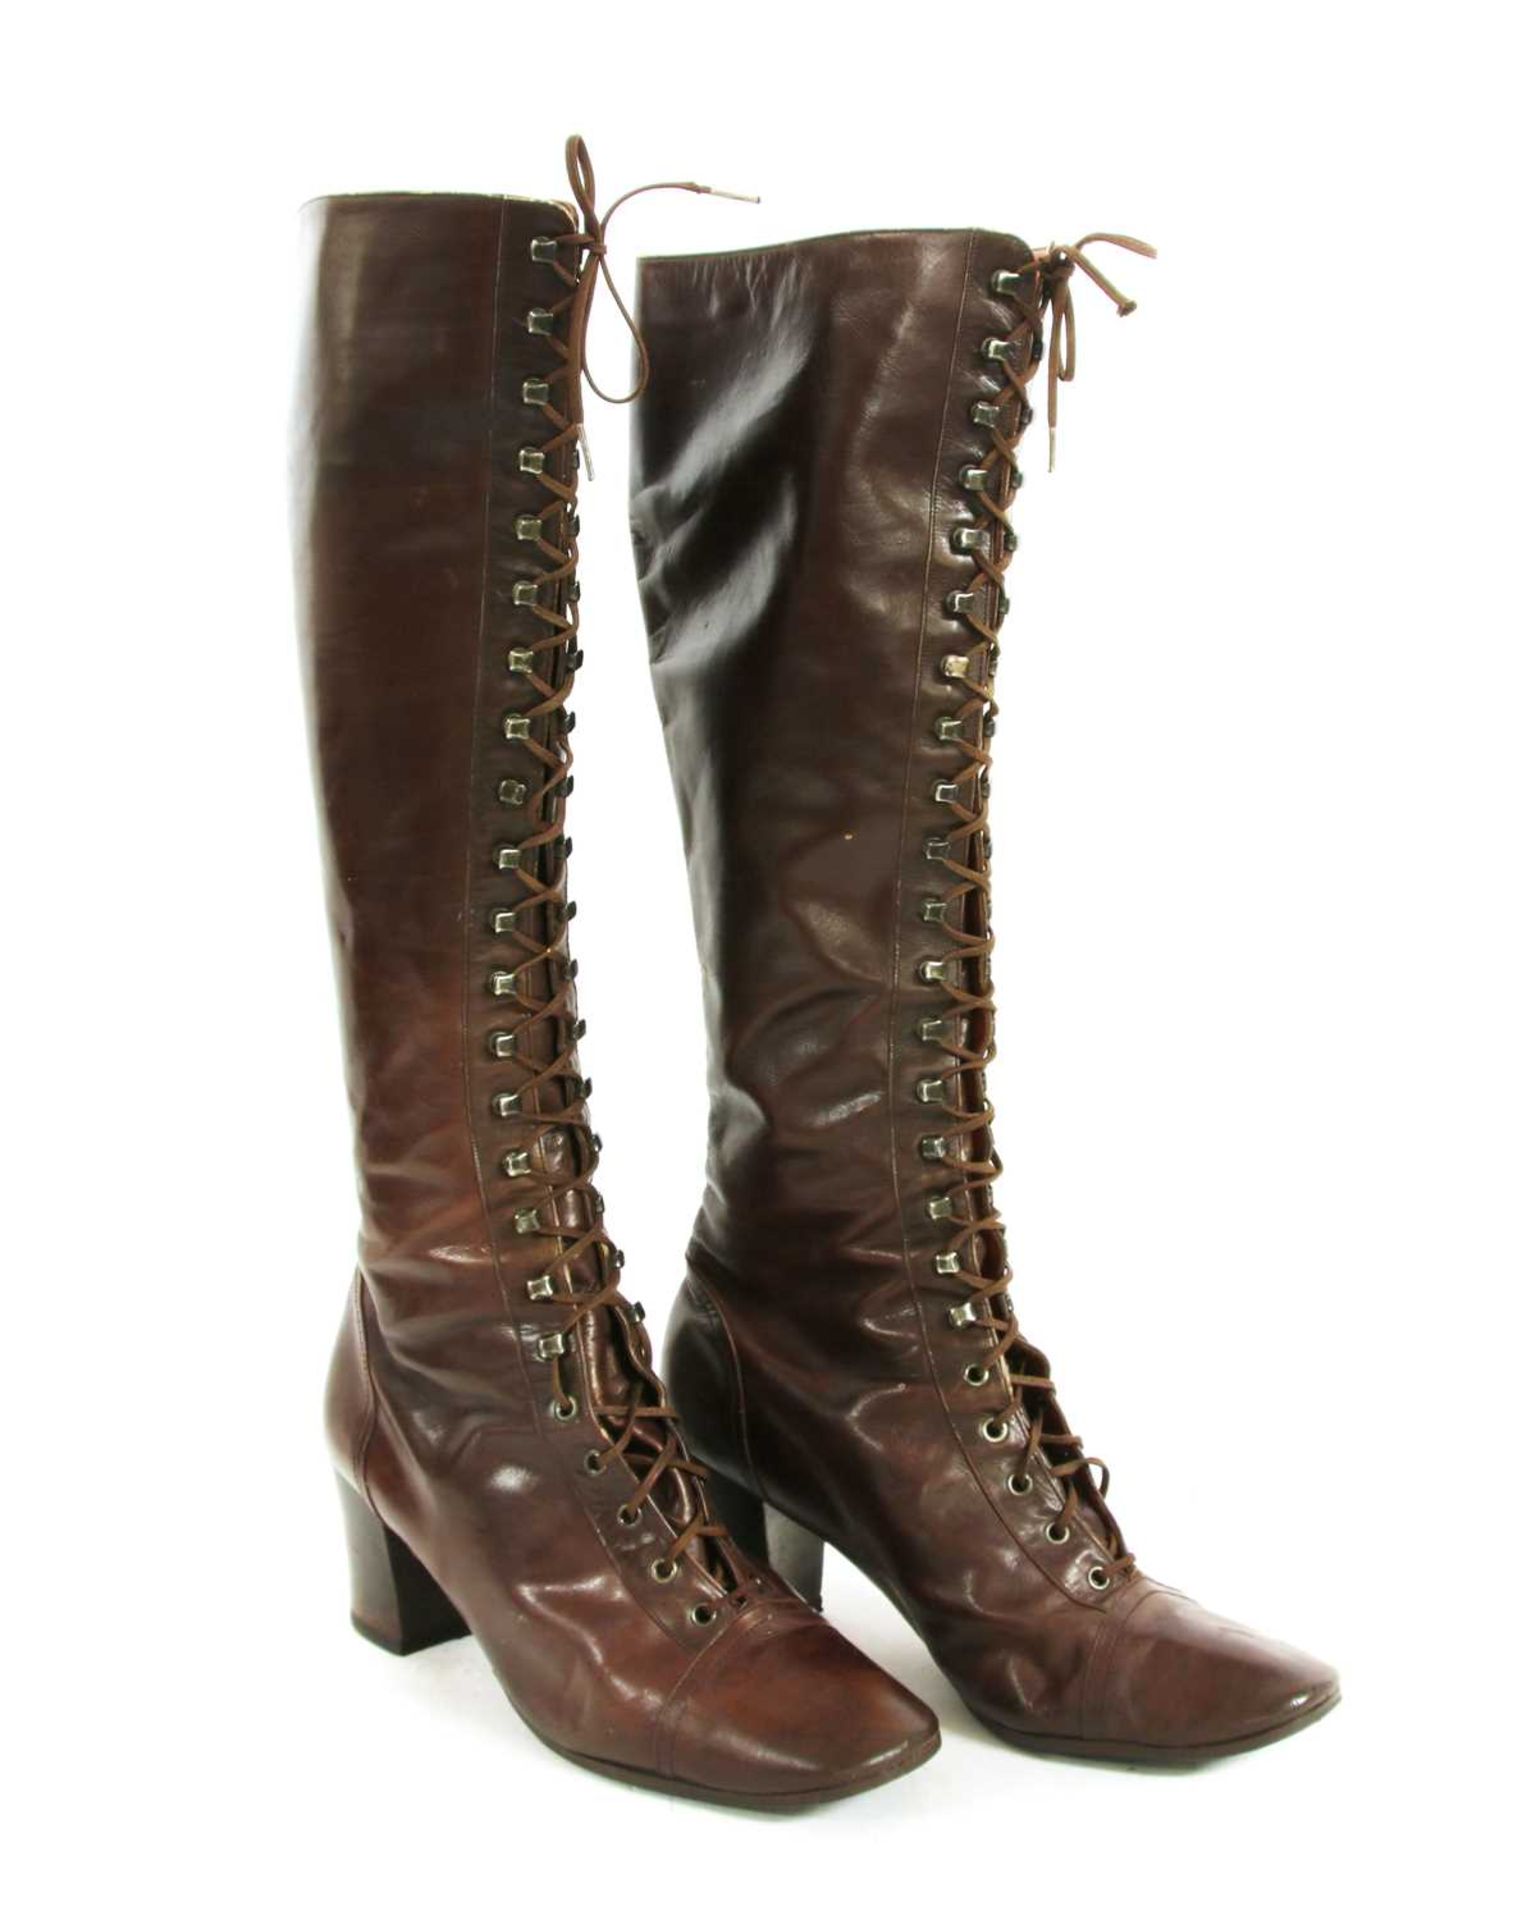 A pair of Yves Saint Laurent heeled knee-high boots,